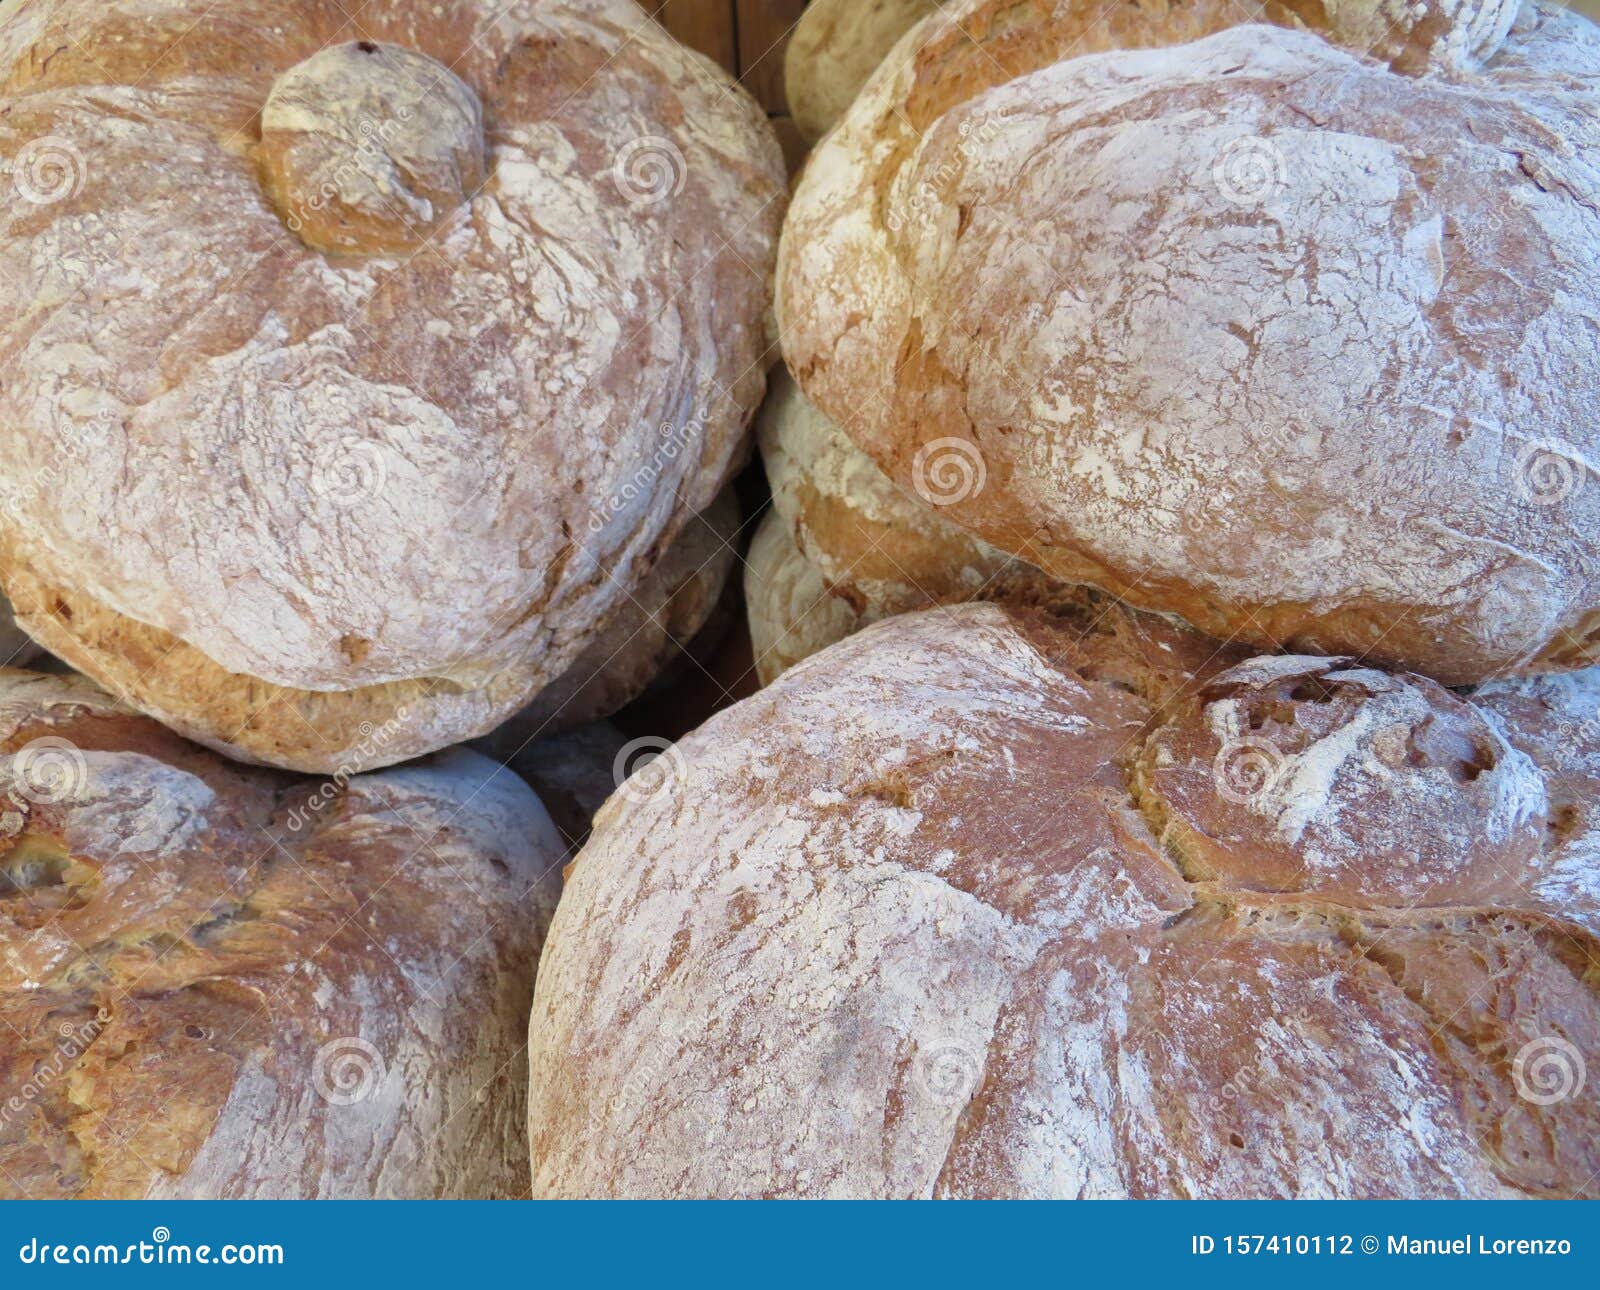 beautiful picture of artisan bread prepared by hand